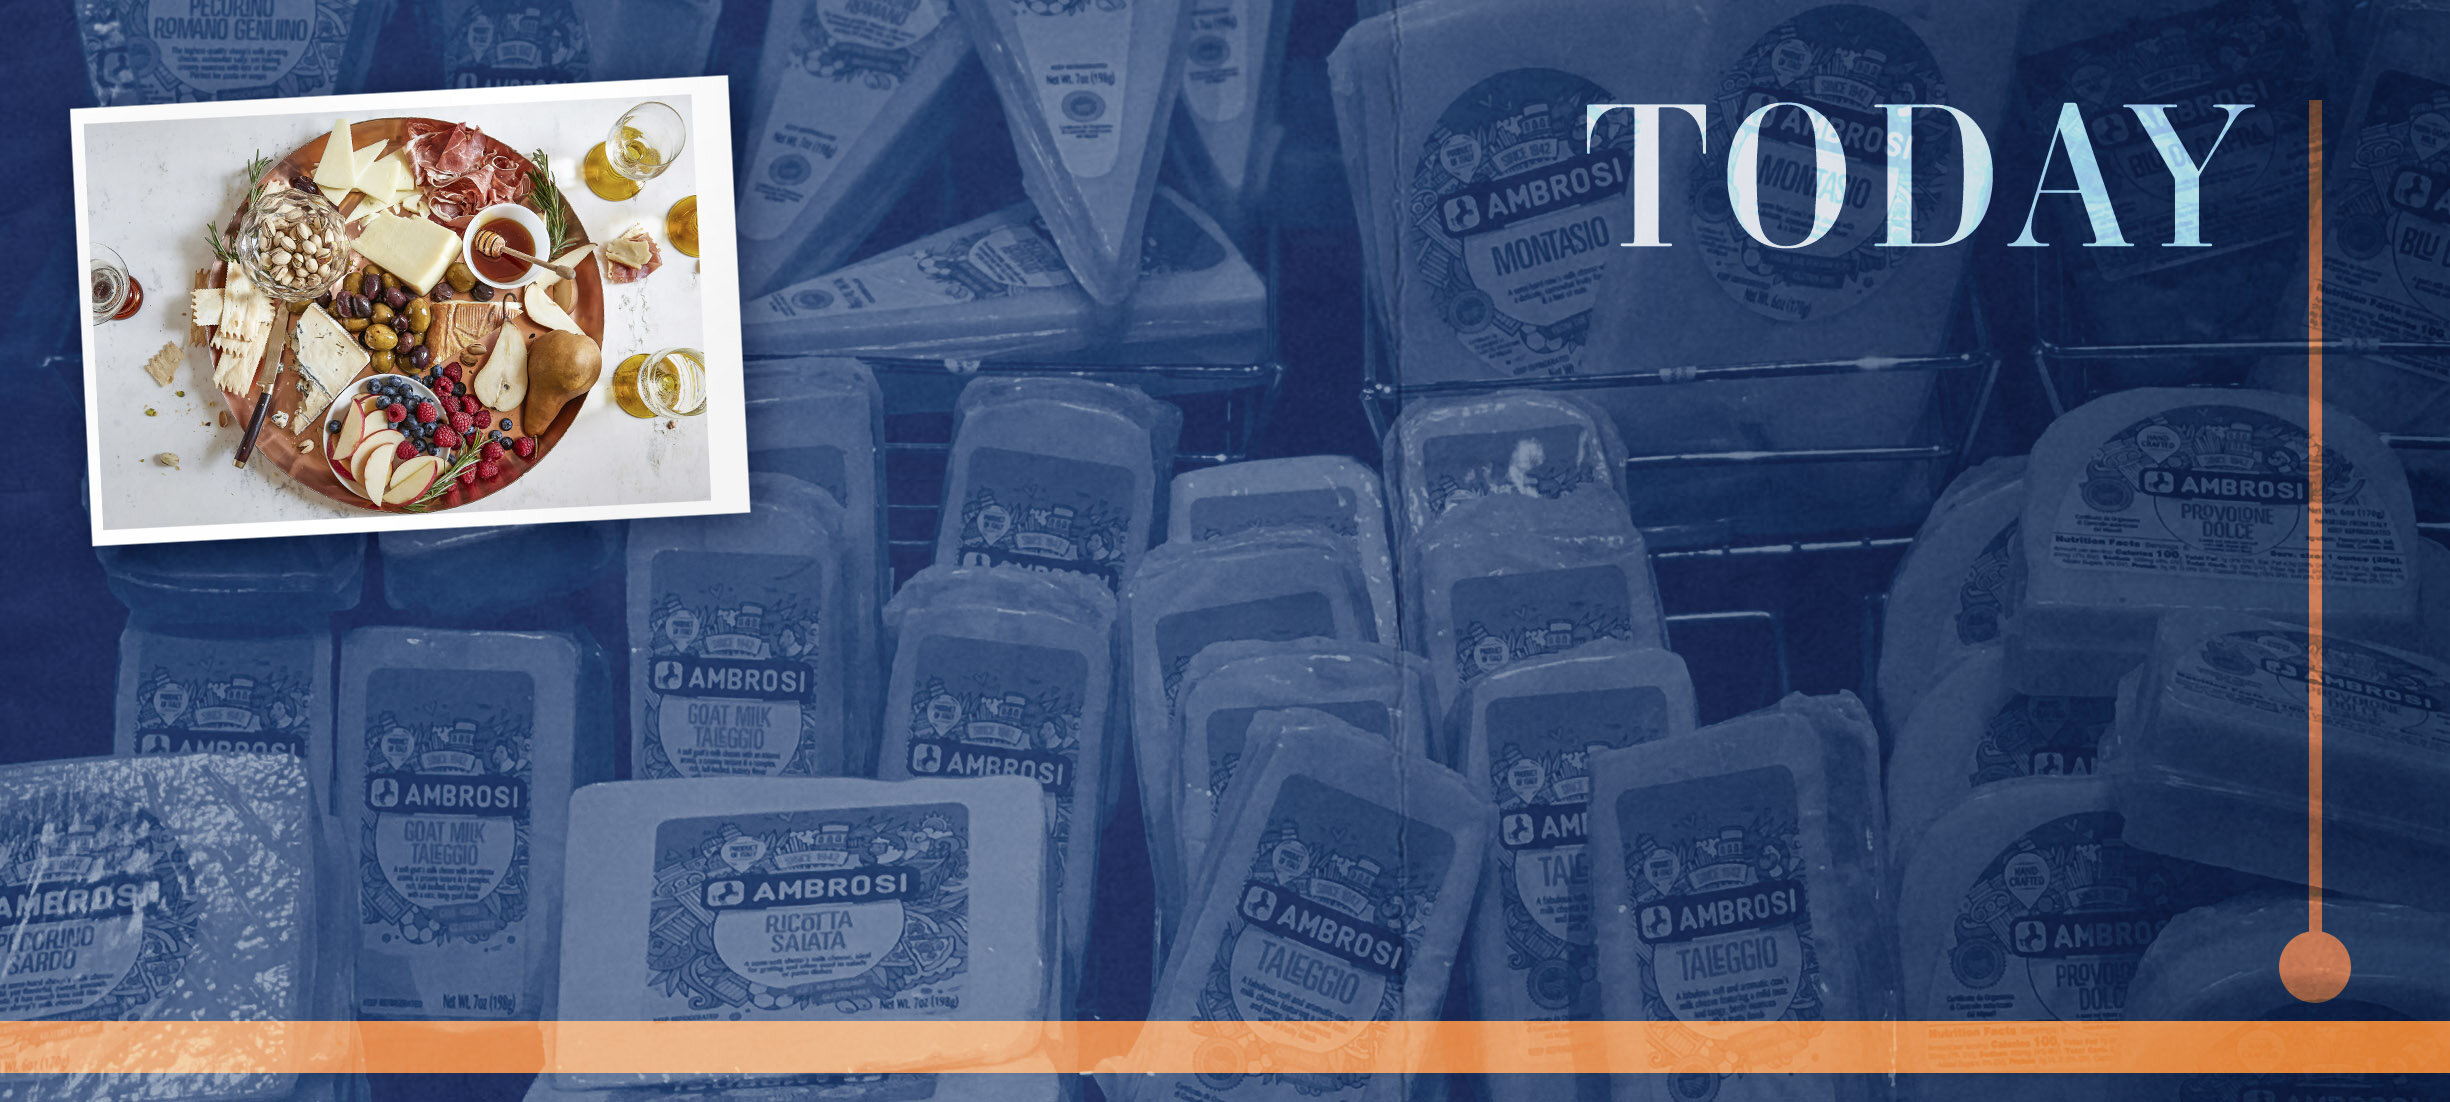  Thanks to Ambrosi USA, retailers and distributors can now have access to a wide assortment of fine Italian cheeses available directly in the USA. 